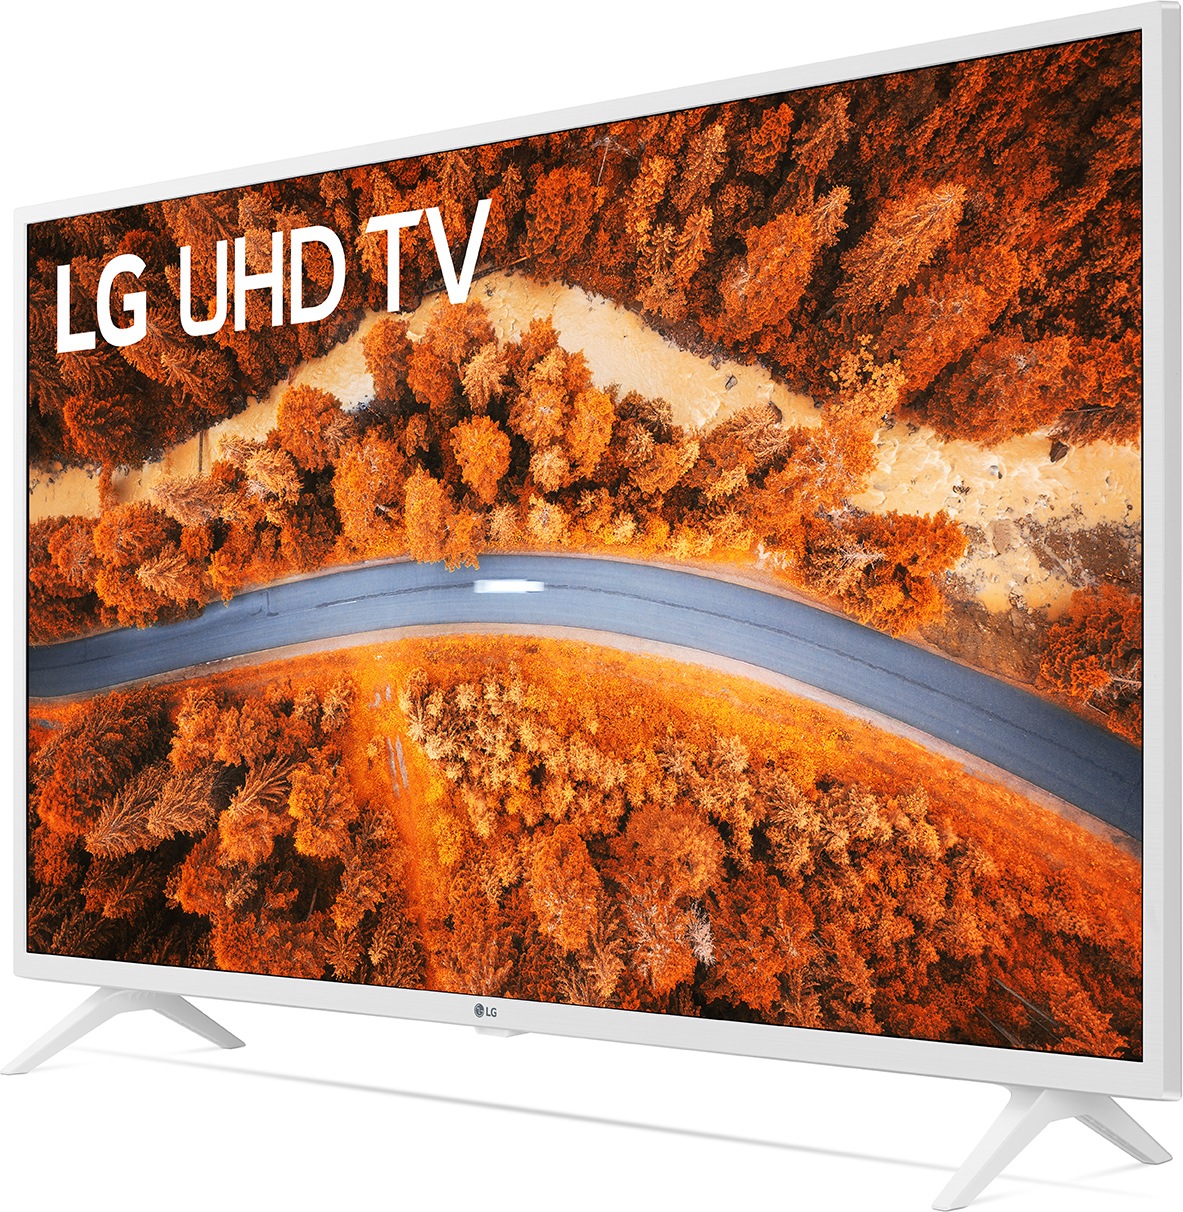 TV Fernseher 4K Smart- bei LG IPS«, cm/43 Zoll, 109 OTTO »43UP76906LE, LCD-LED Ultra HD, jetzt